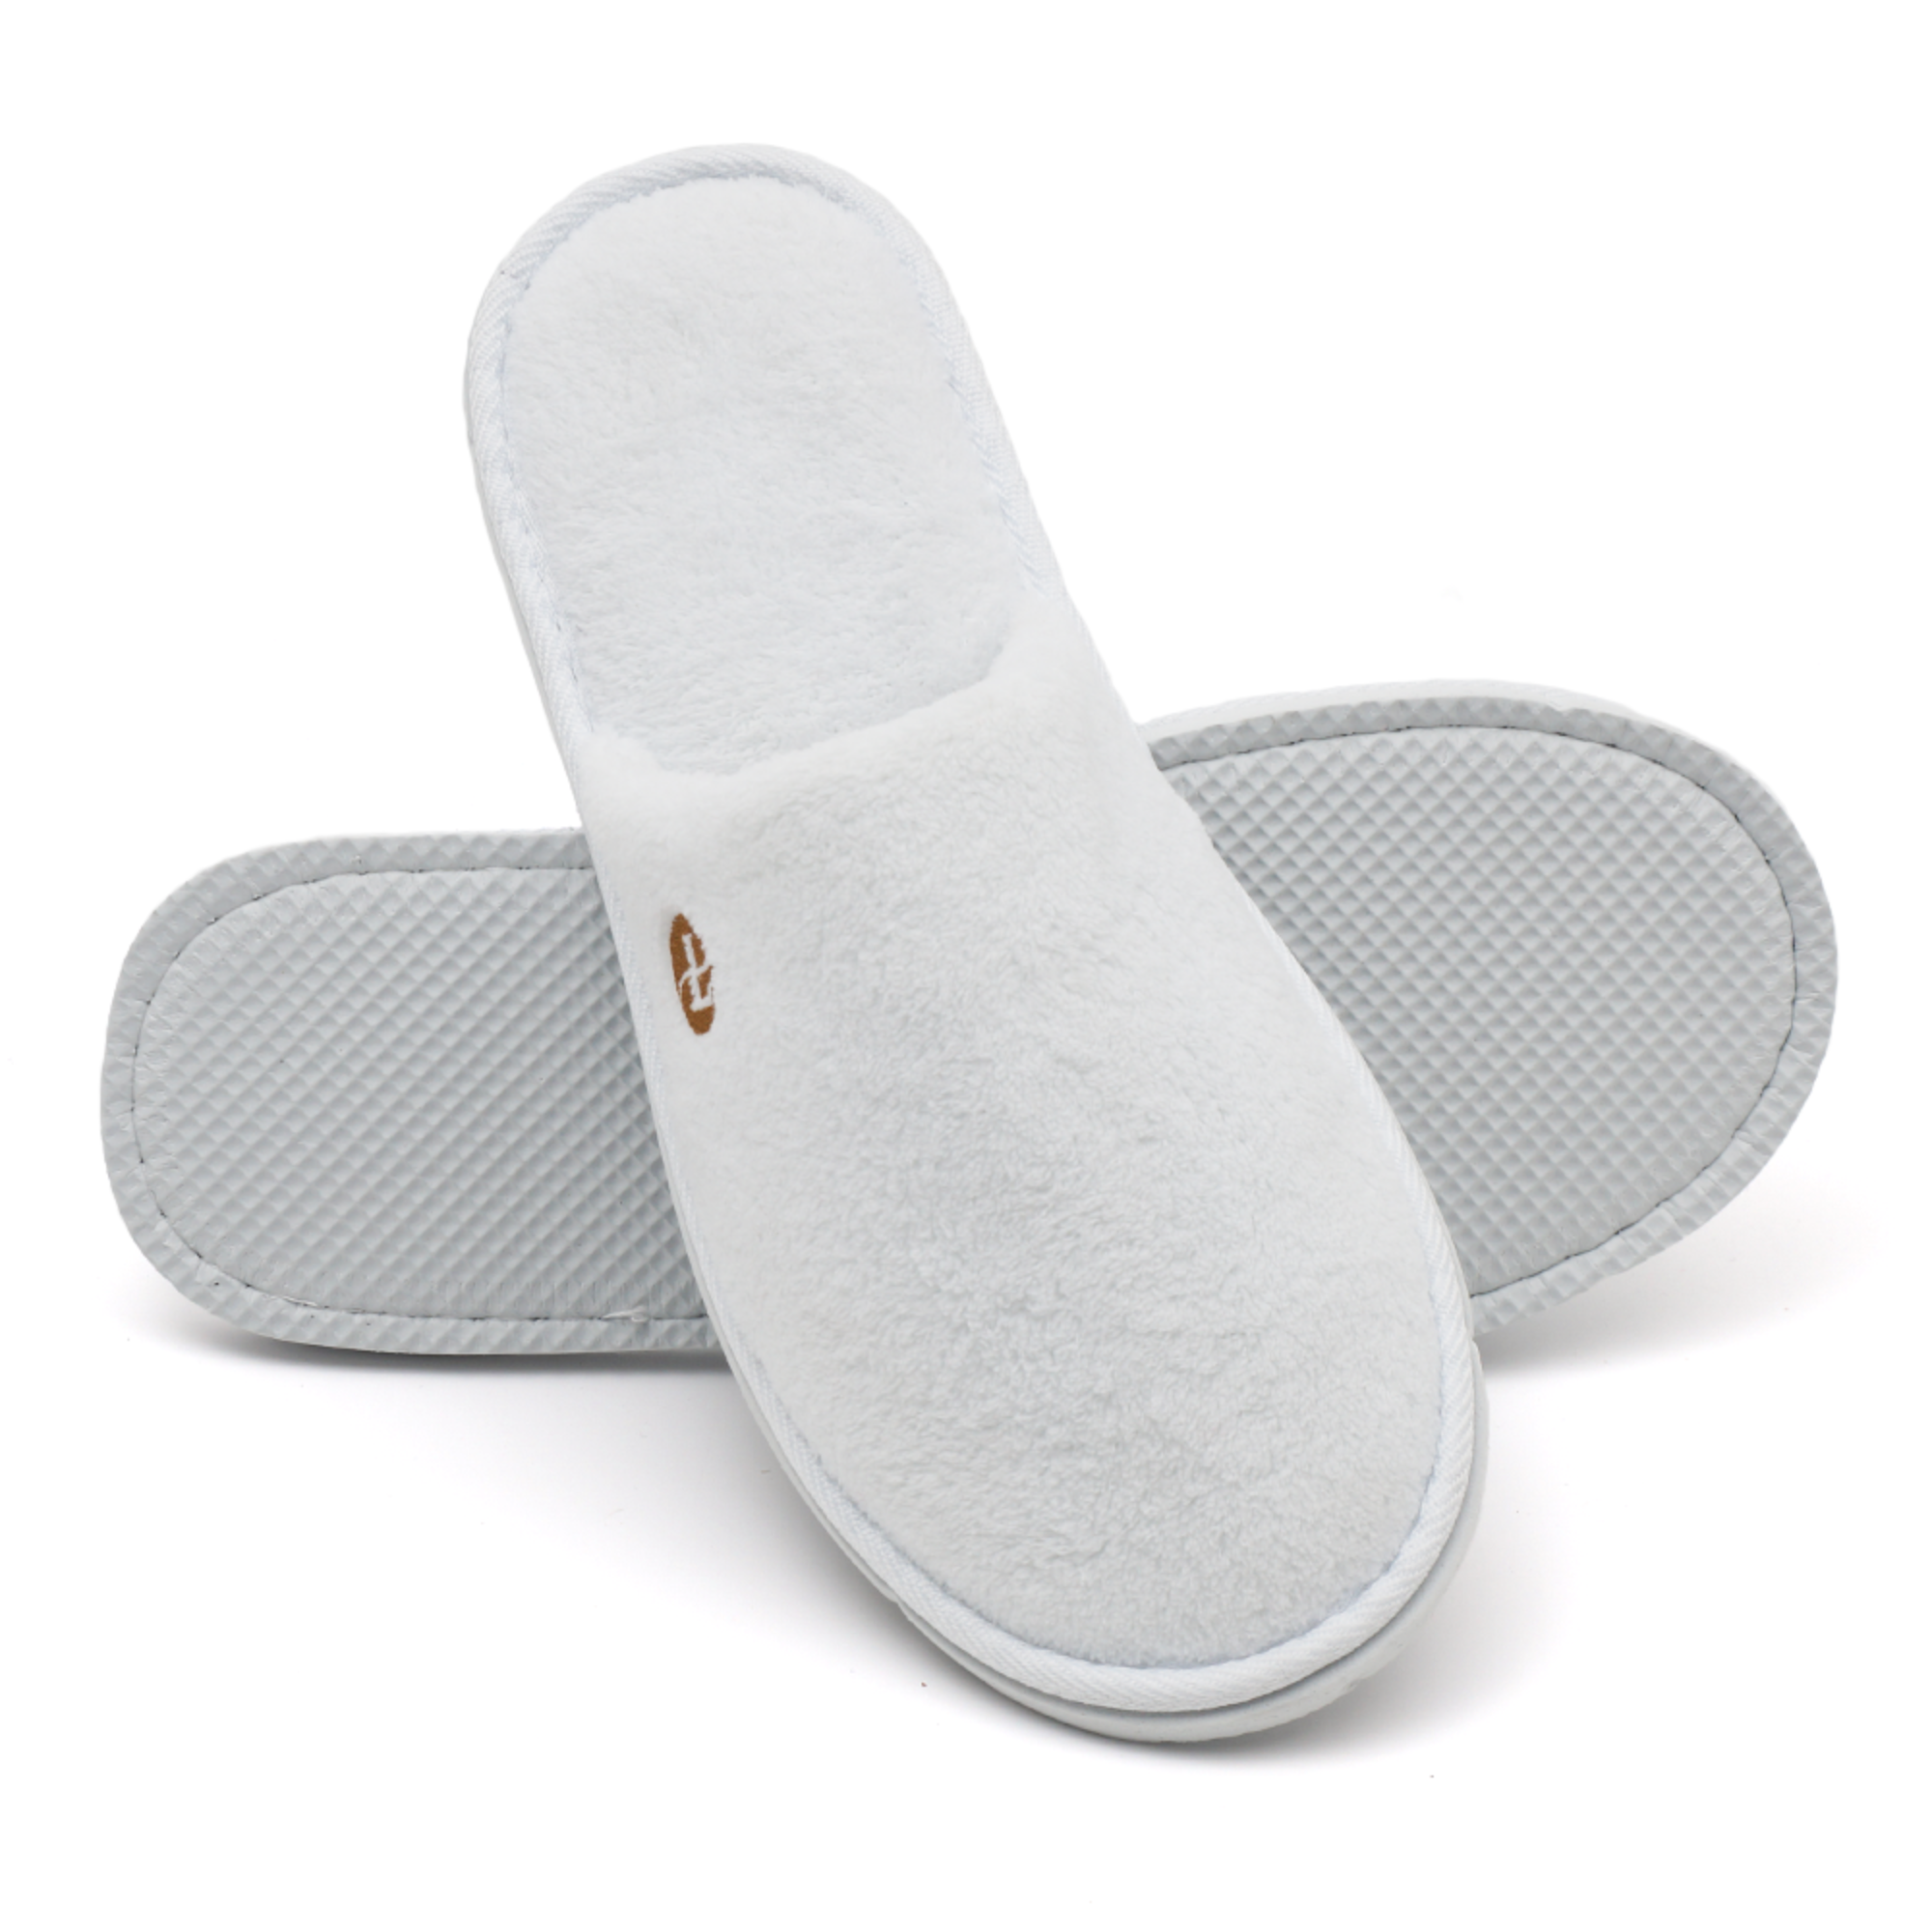 Luxury Customized Embroidery Logo Coral Velvet Spa Disposable Slippers